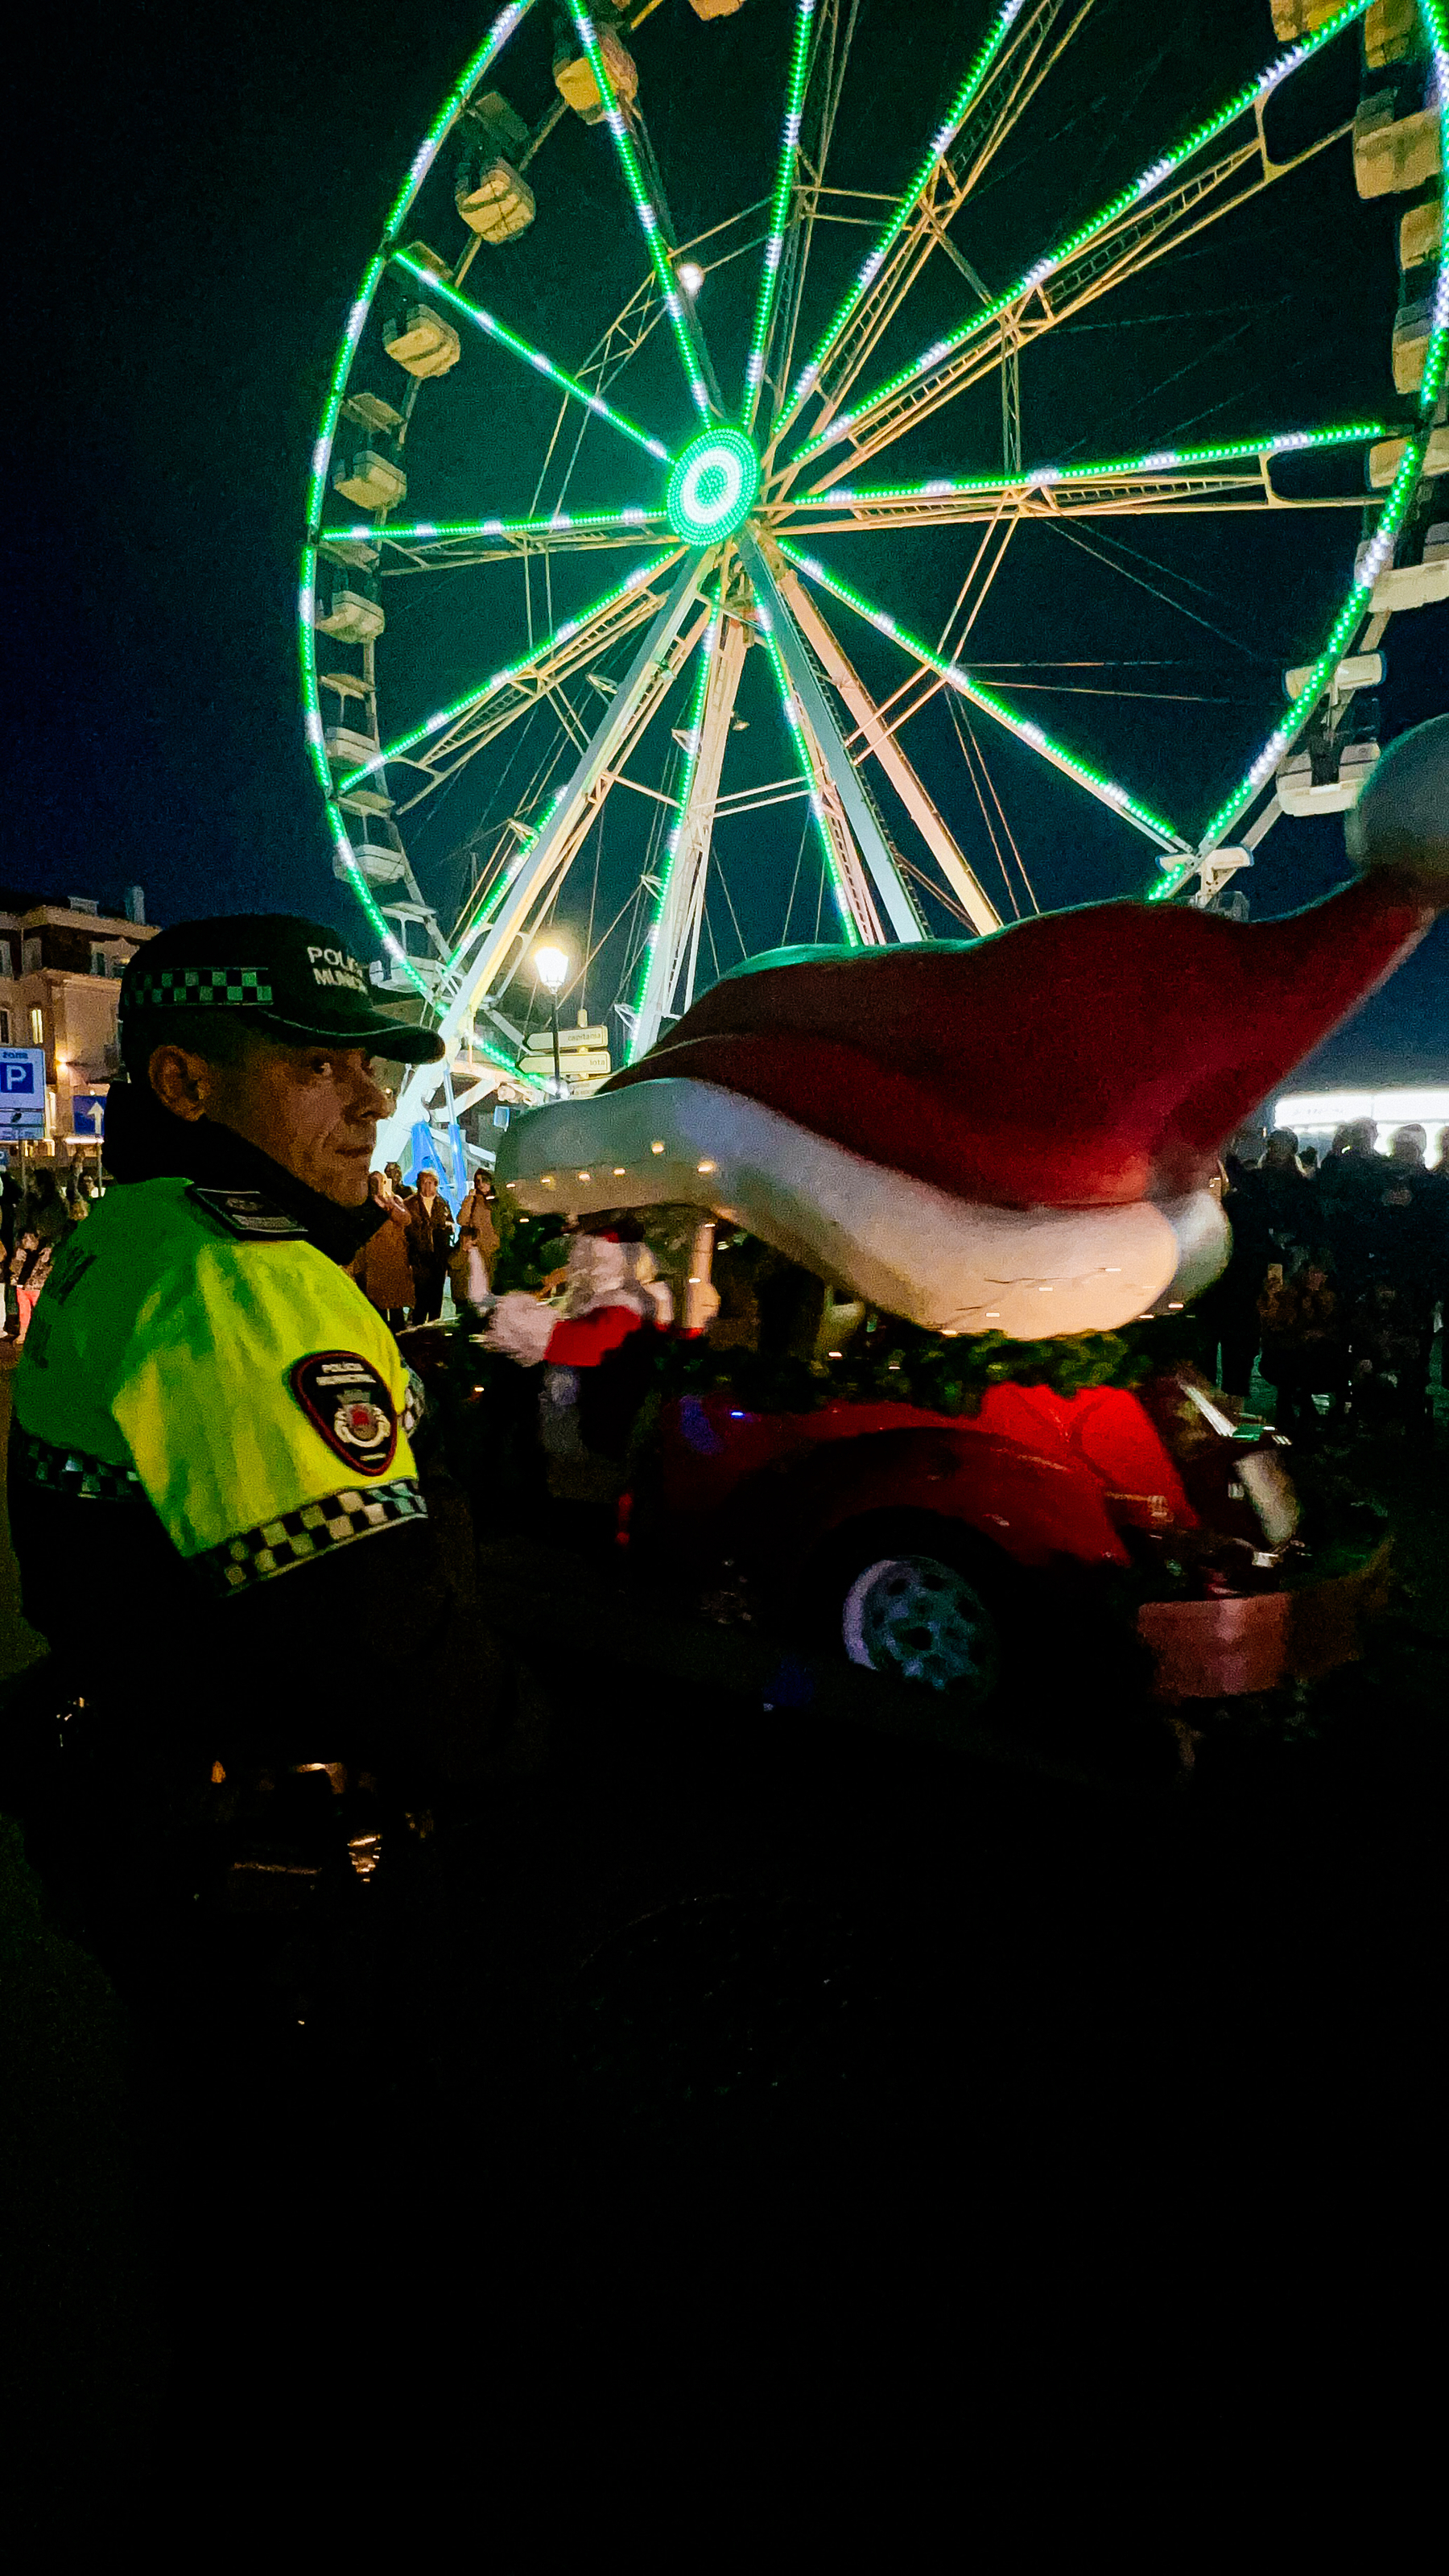 A night scene at a festive event with a ferris wheel illuminated with green lights in the background. In the foreground, a person in a police uniform is visible, and a parade float decorated to look like a whimsical car with a giant Santa Claus